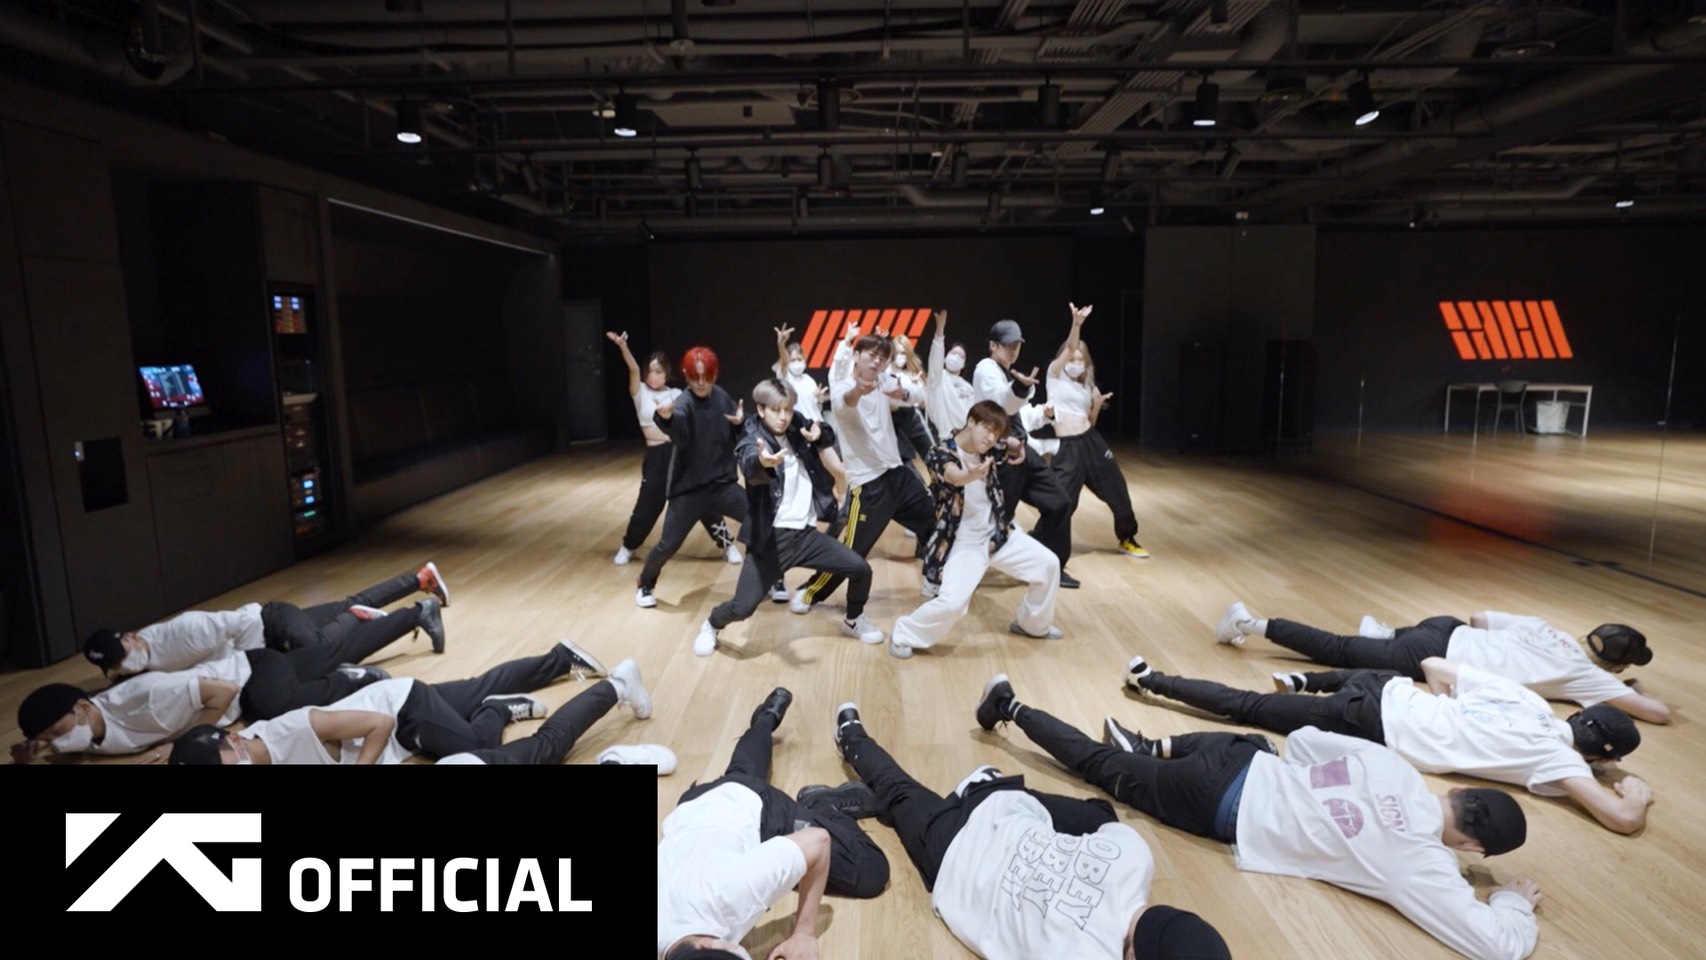 iKON - '열중쉬어 (At ease)' DANCE PRACTICE VIDEO